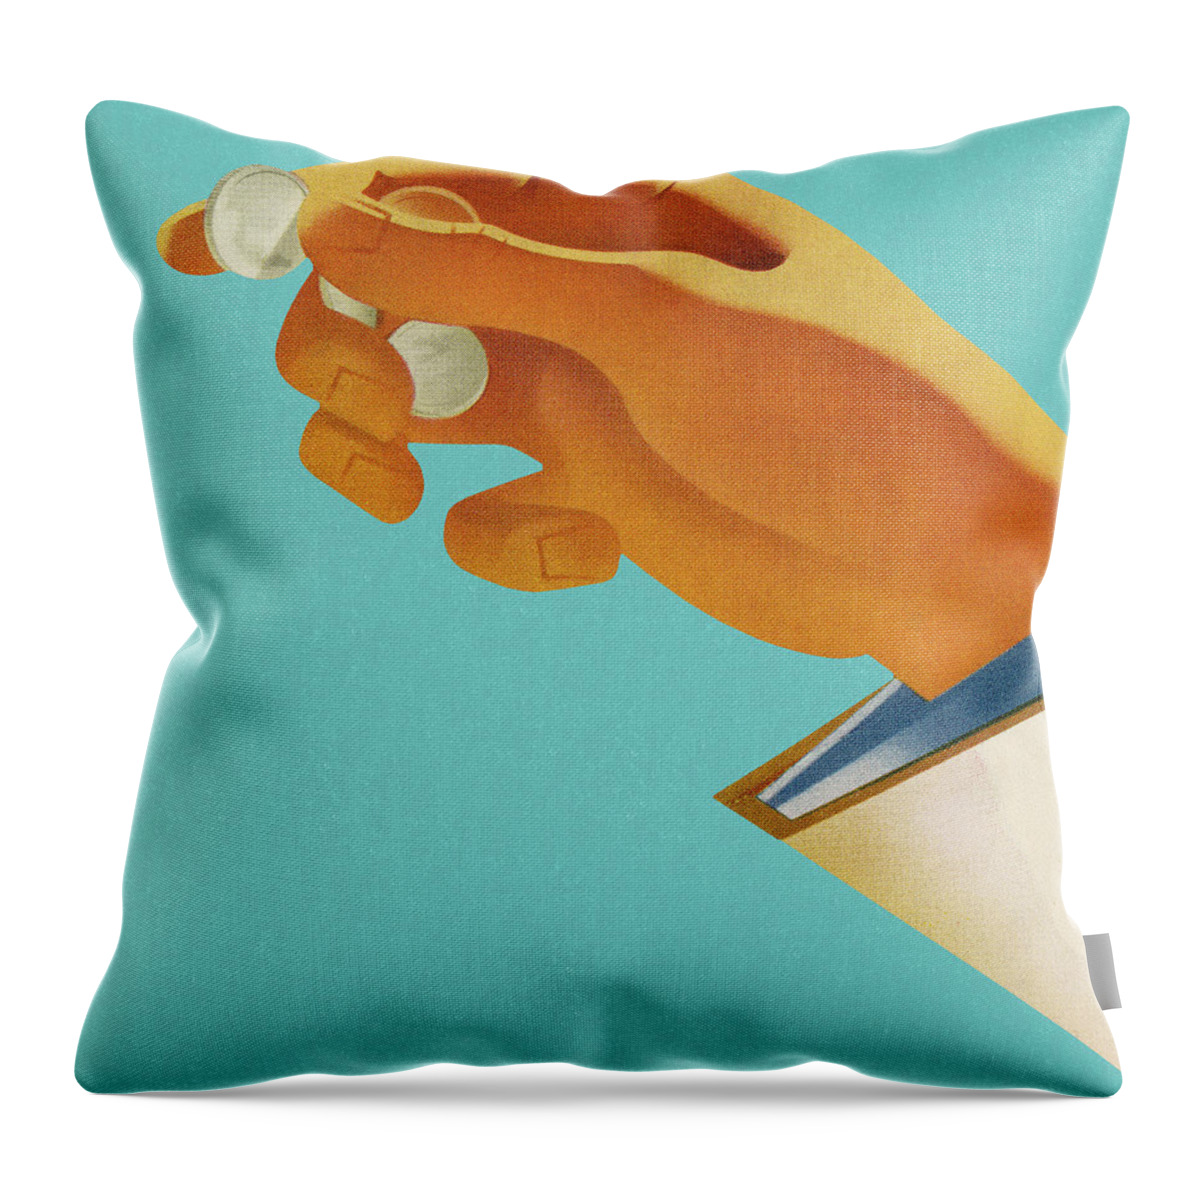 Blue Background Throw Pillow featuring the drawing Hand Holding Coins by CSA Images